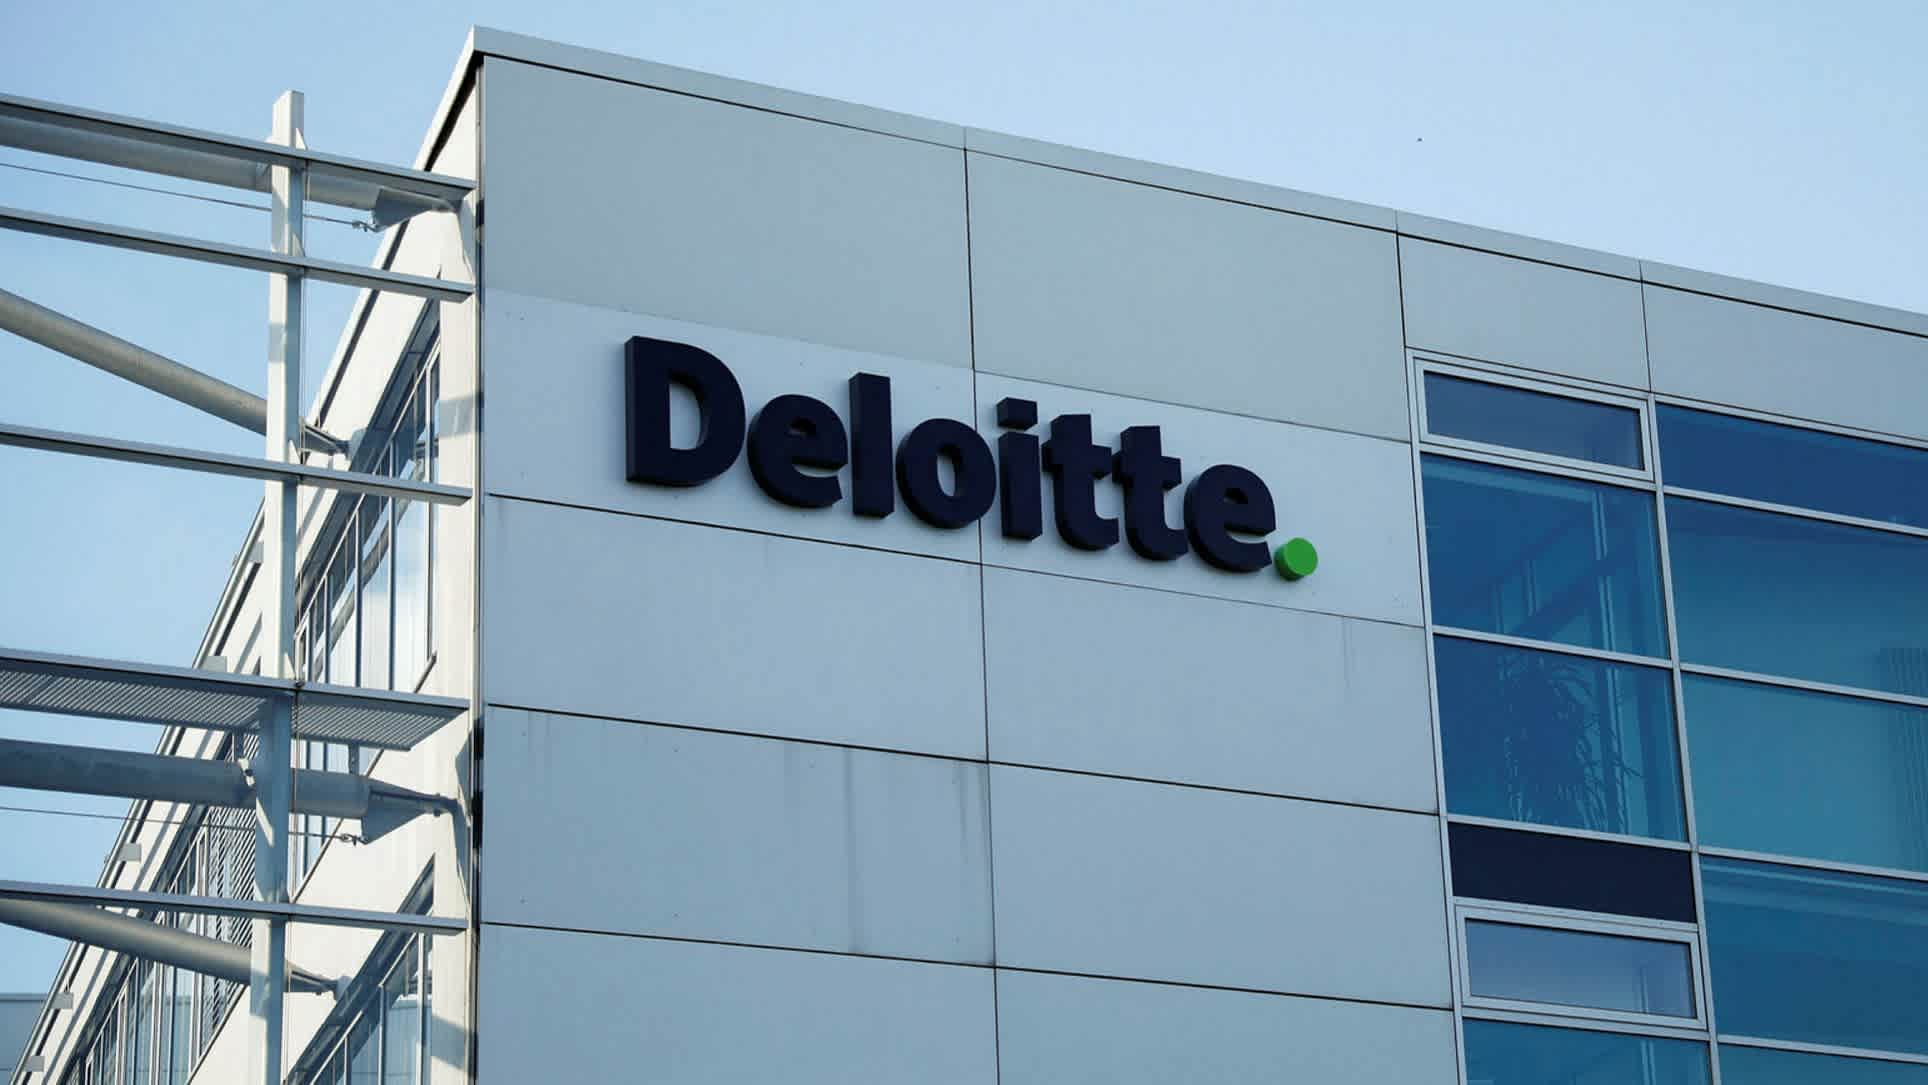 Fired manager accuses Deloitte of defrauding VW and a #MeToo cover-up